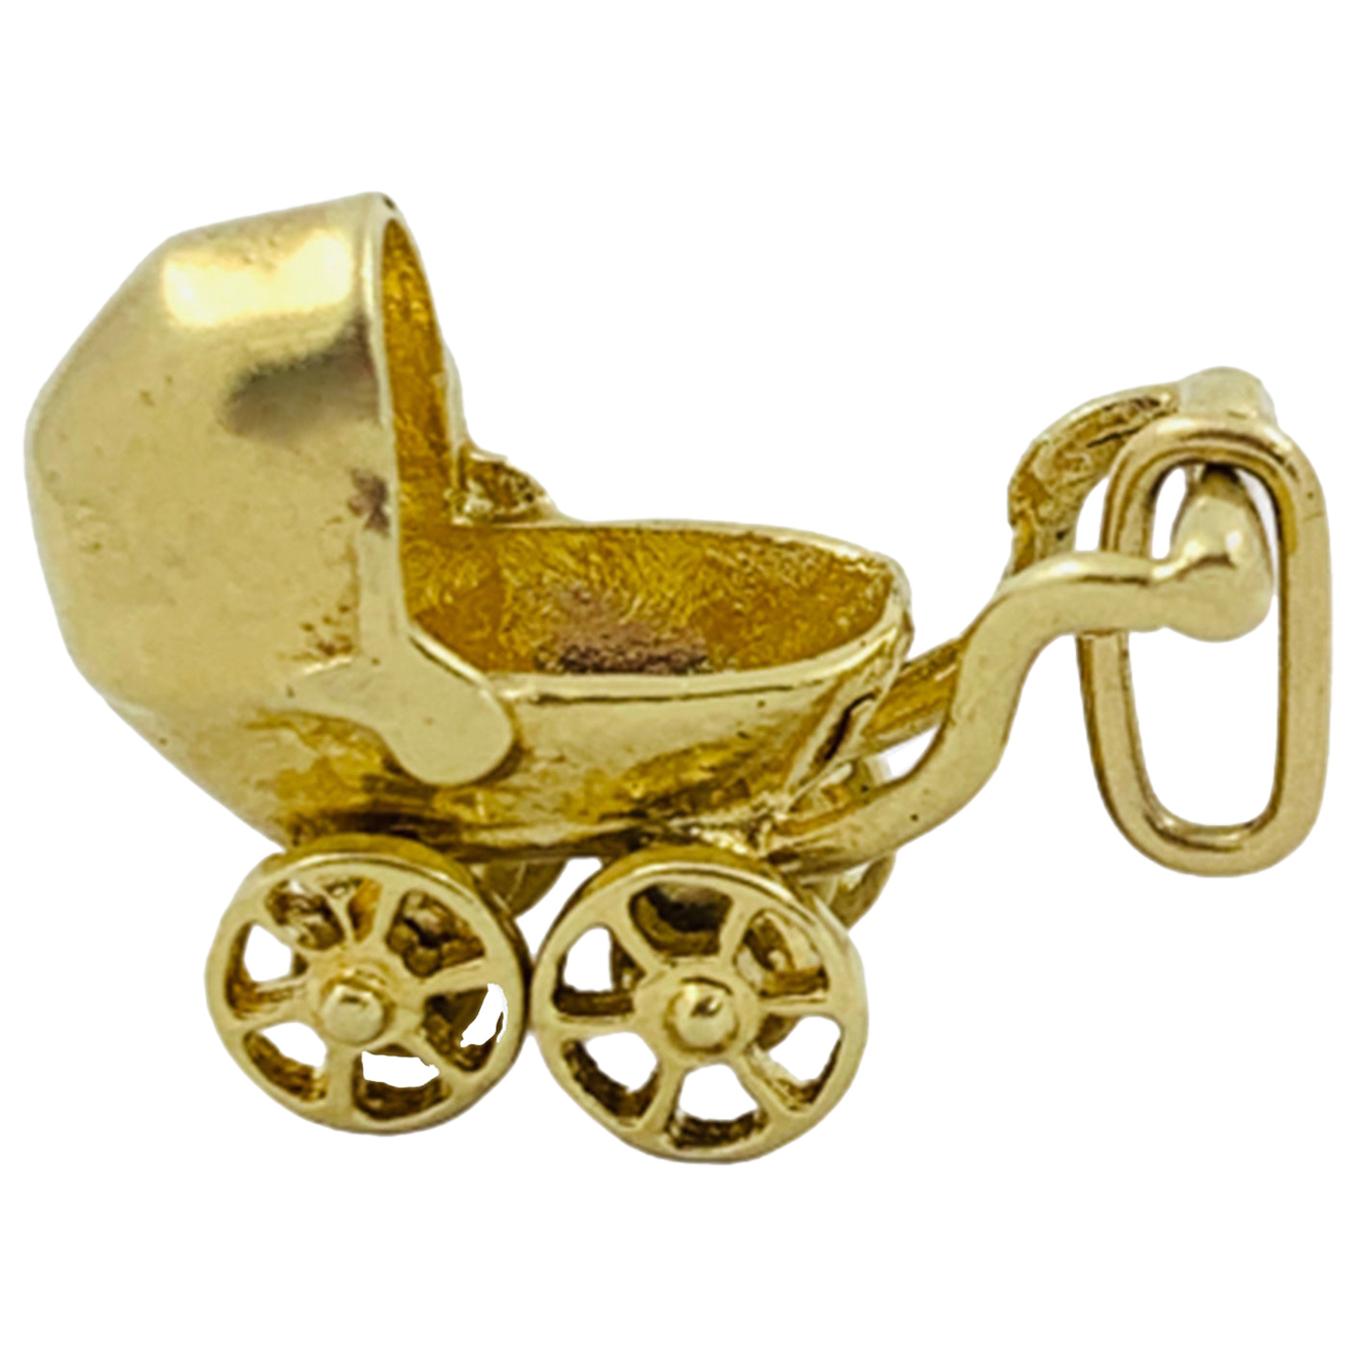 Details about   1/20 12K YELLOW GOLD FILLED BABY BUGGY CARRIAGE STROLLER CHARM *** 